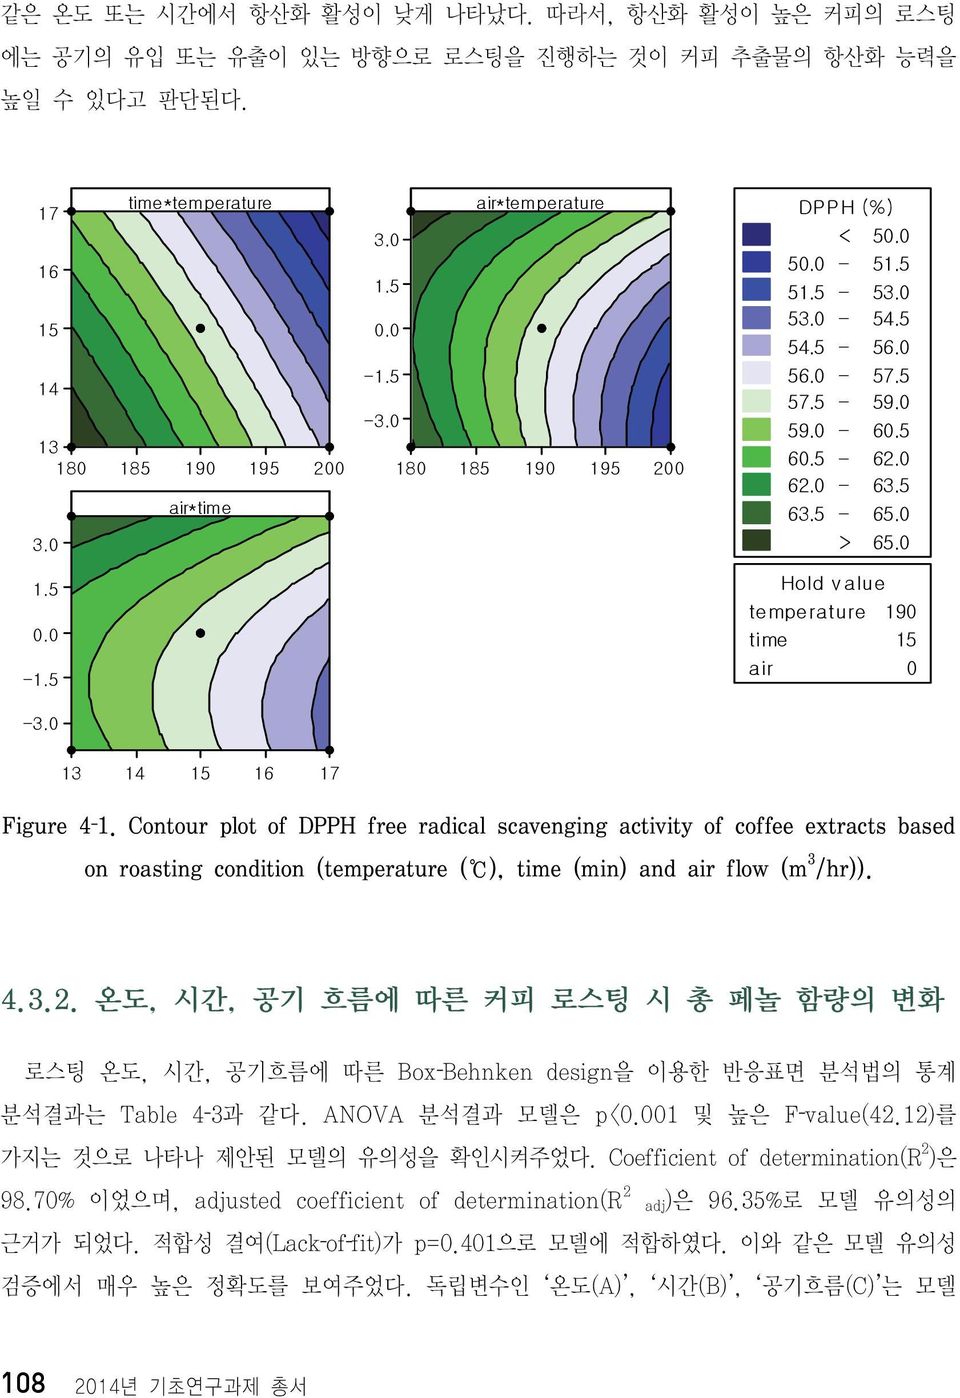 0 13 14 15 16 17 Figure 4 1. Contour plot of DPPH free radical scavenging activity of coffee extracts based on roasting condition (temperature ( ), time (min) and air flow (m 3 /hr)). 4.3.2.